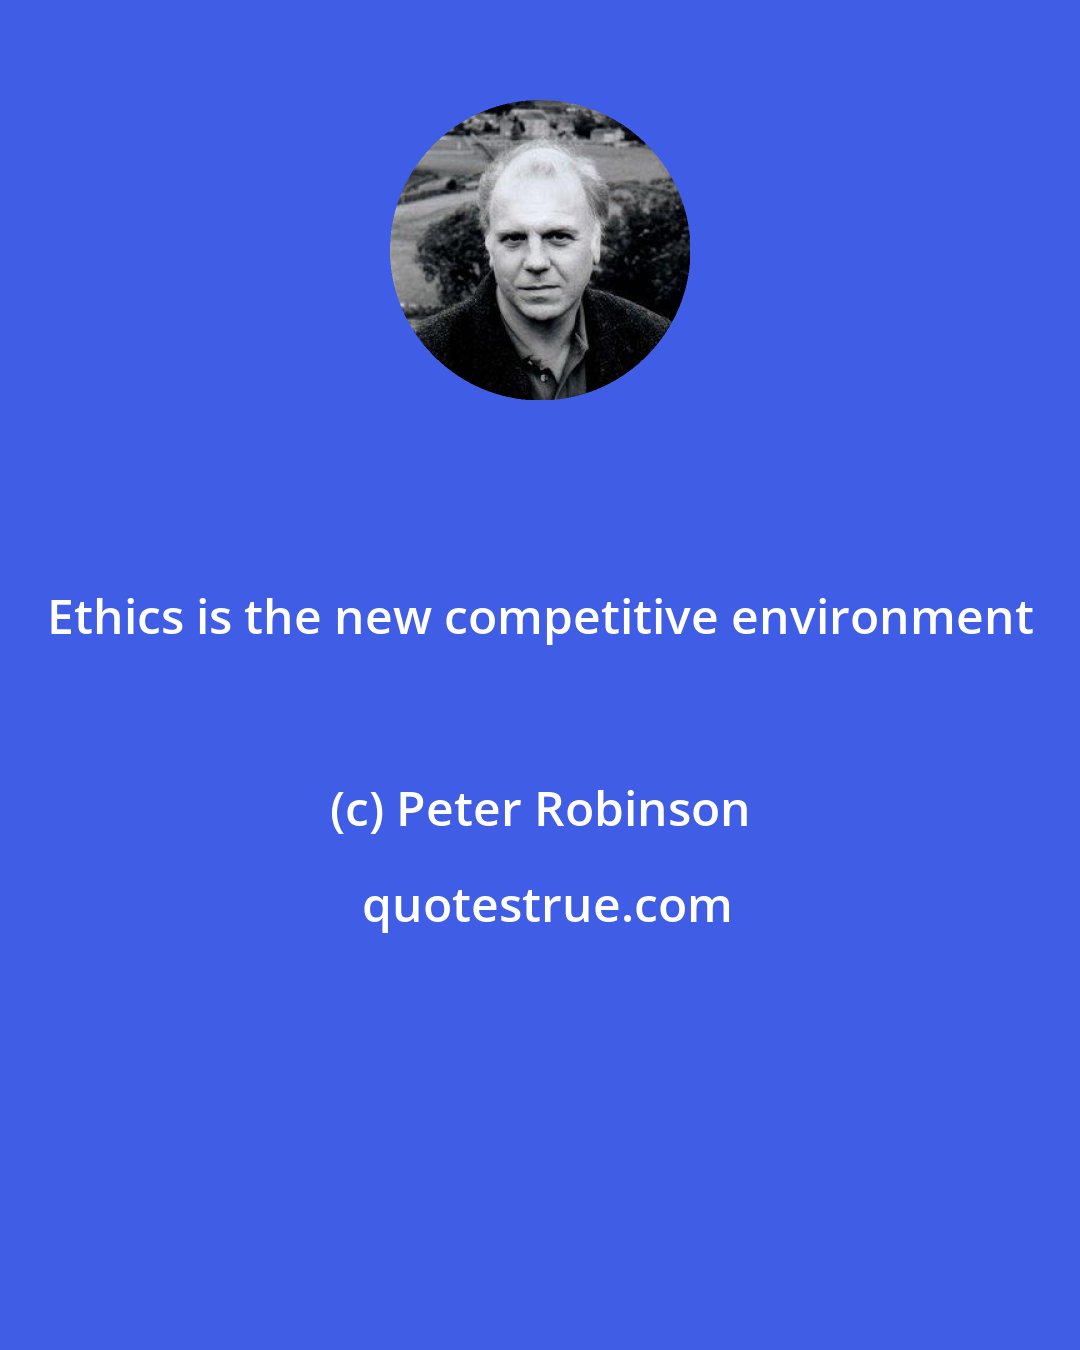 Peter Robinson: Ethics is the new competitive environment